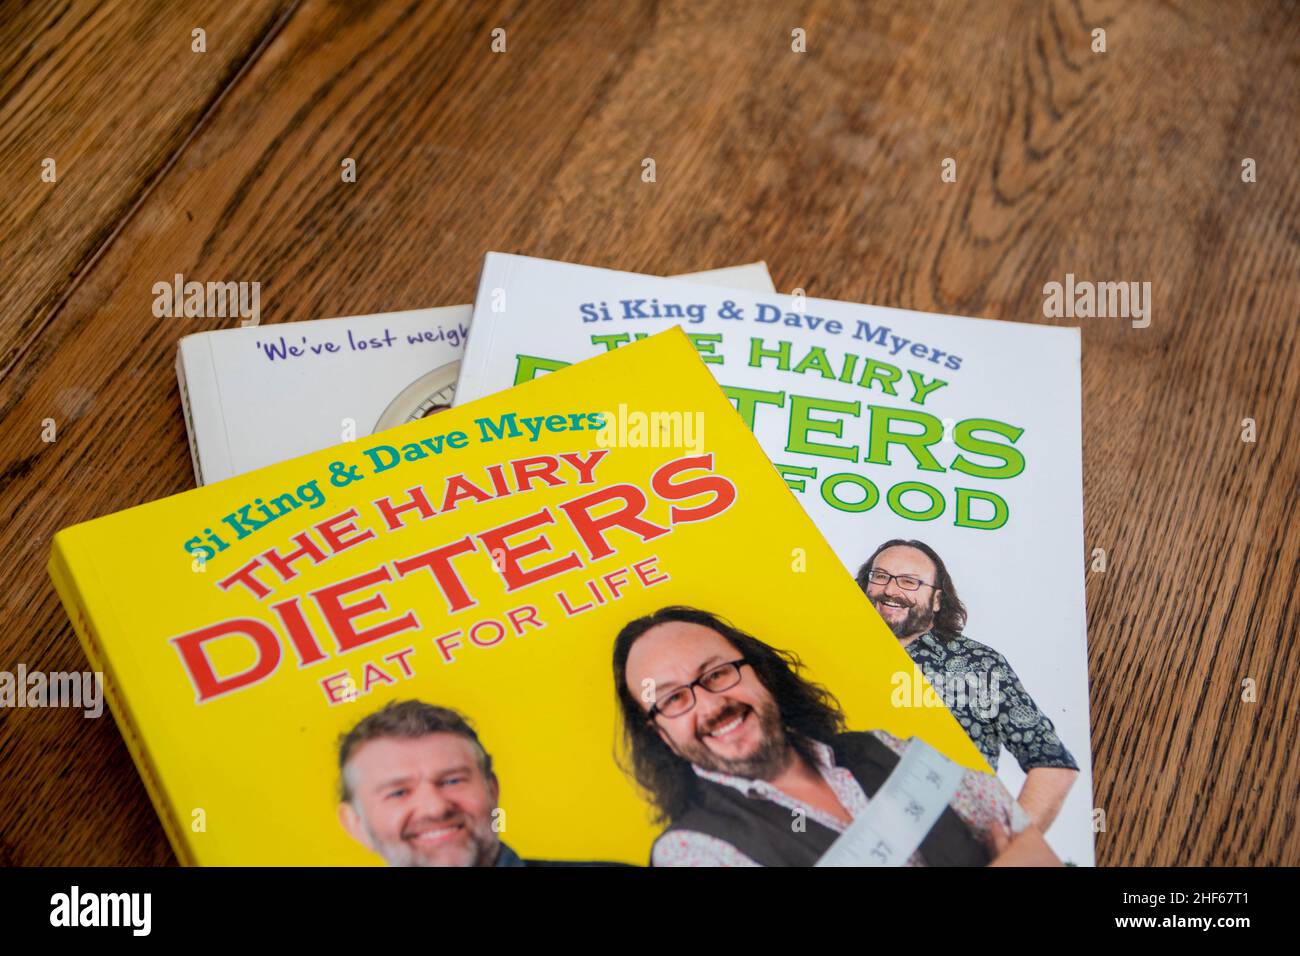 Durham, UK - 20 Nov 2020: Si King and David Myers Hairy Dieters celebrity cook book by the Hairy Bikers. Celeb chefs teach how to cook real food but s Stock Photo